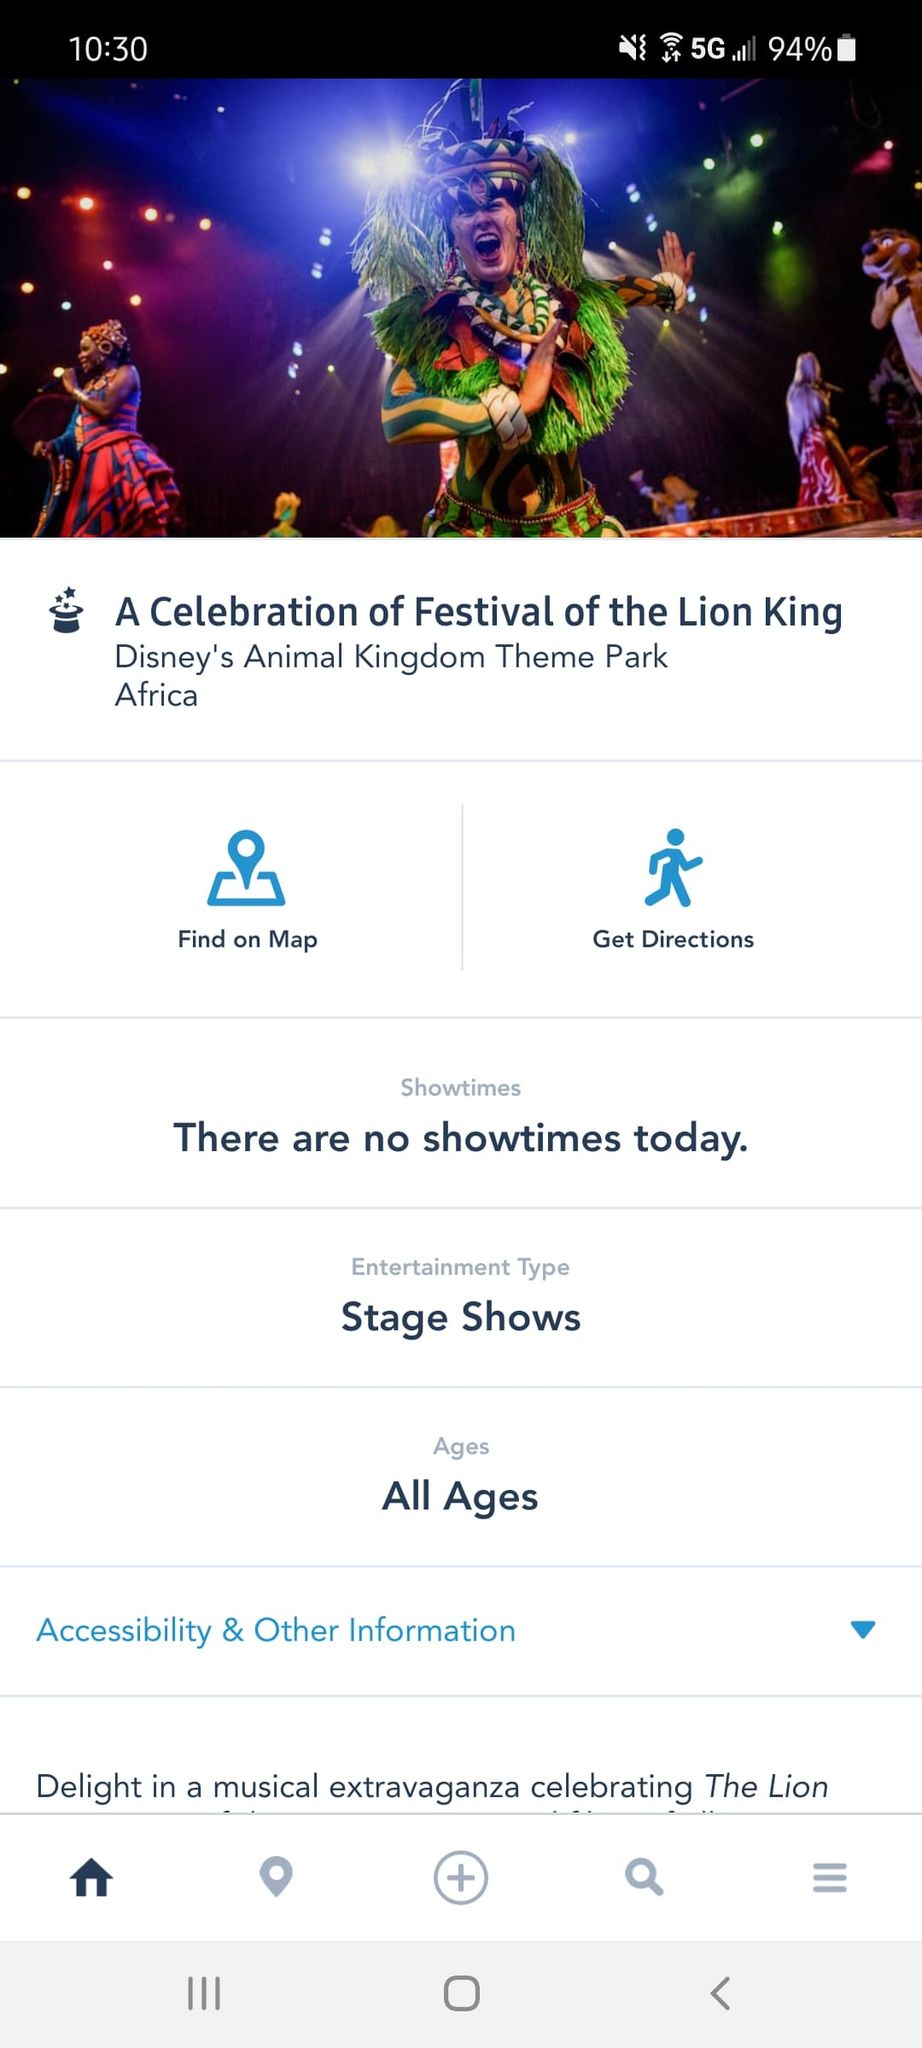 A Celebration of Festival of the Lion King to Opening Today at Disney’s Animal Kingdom